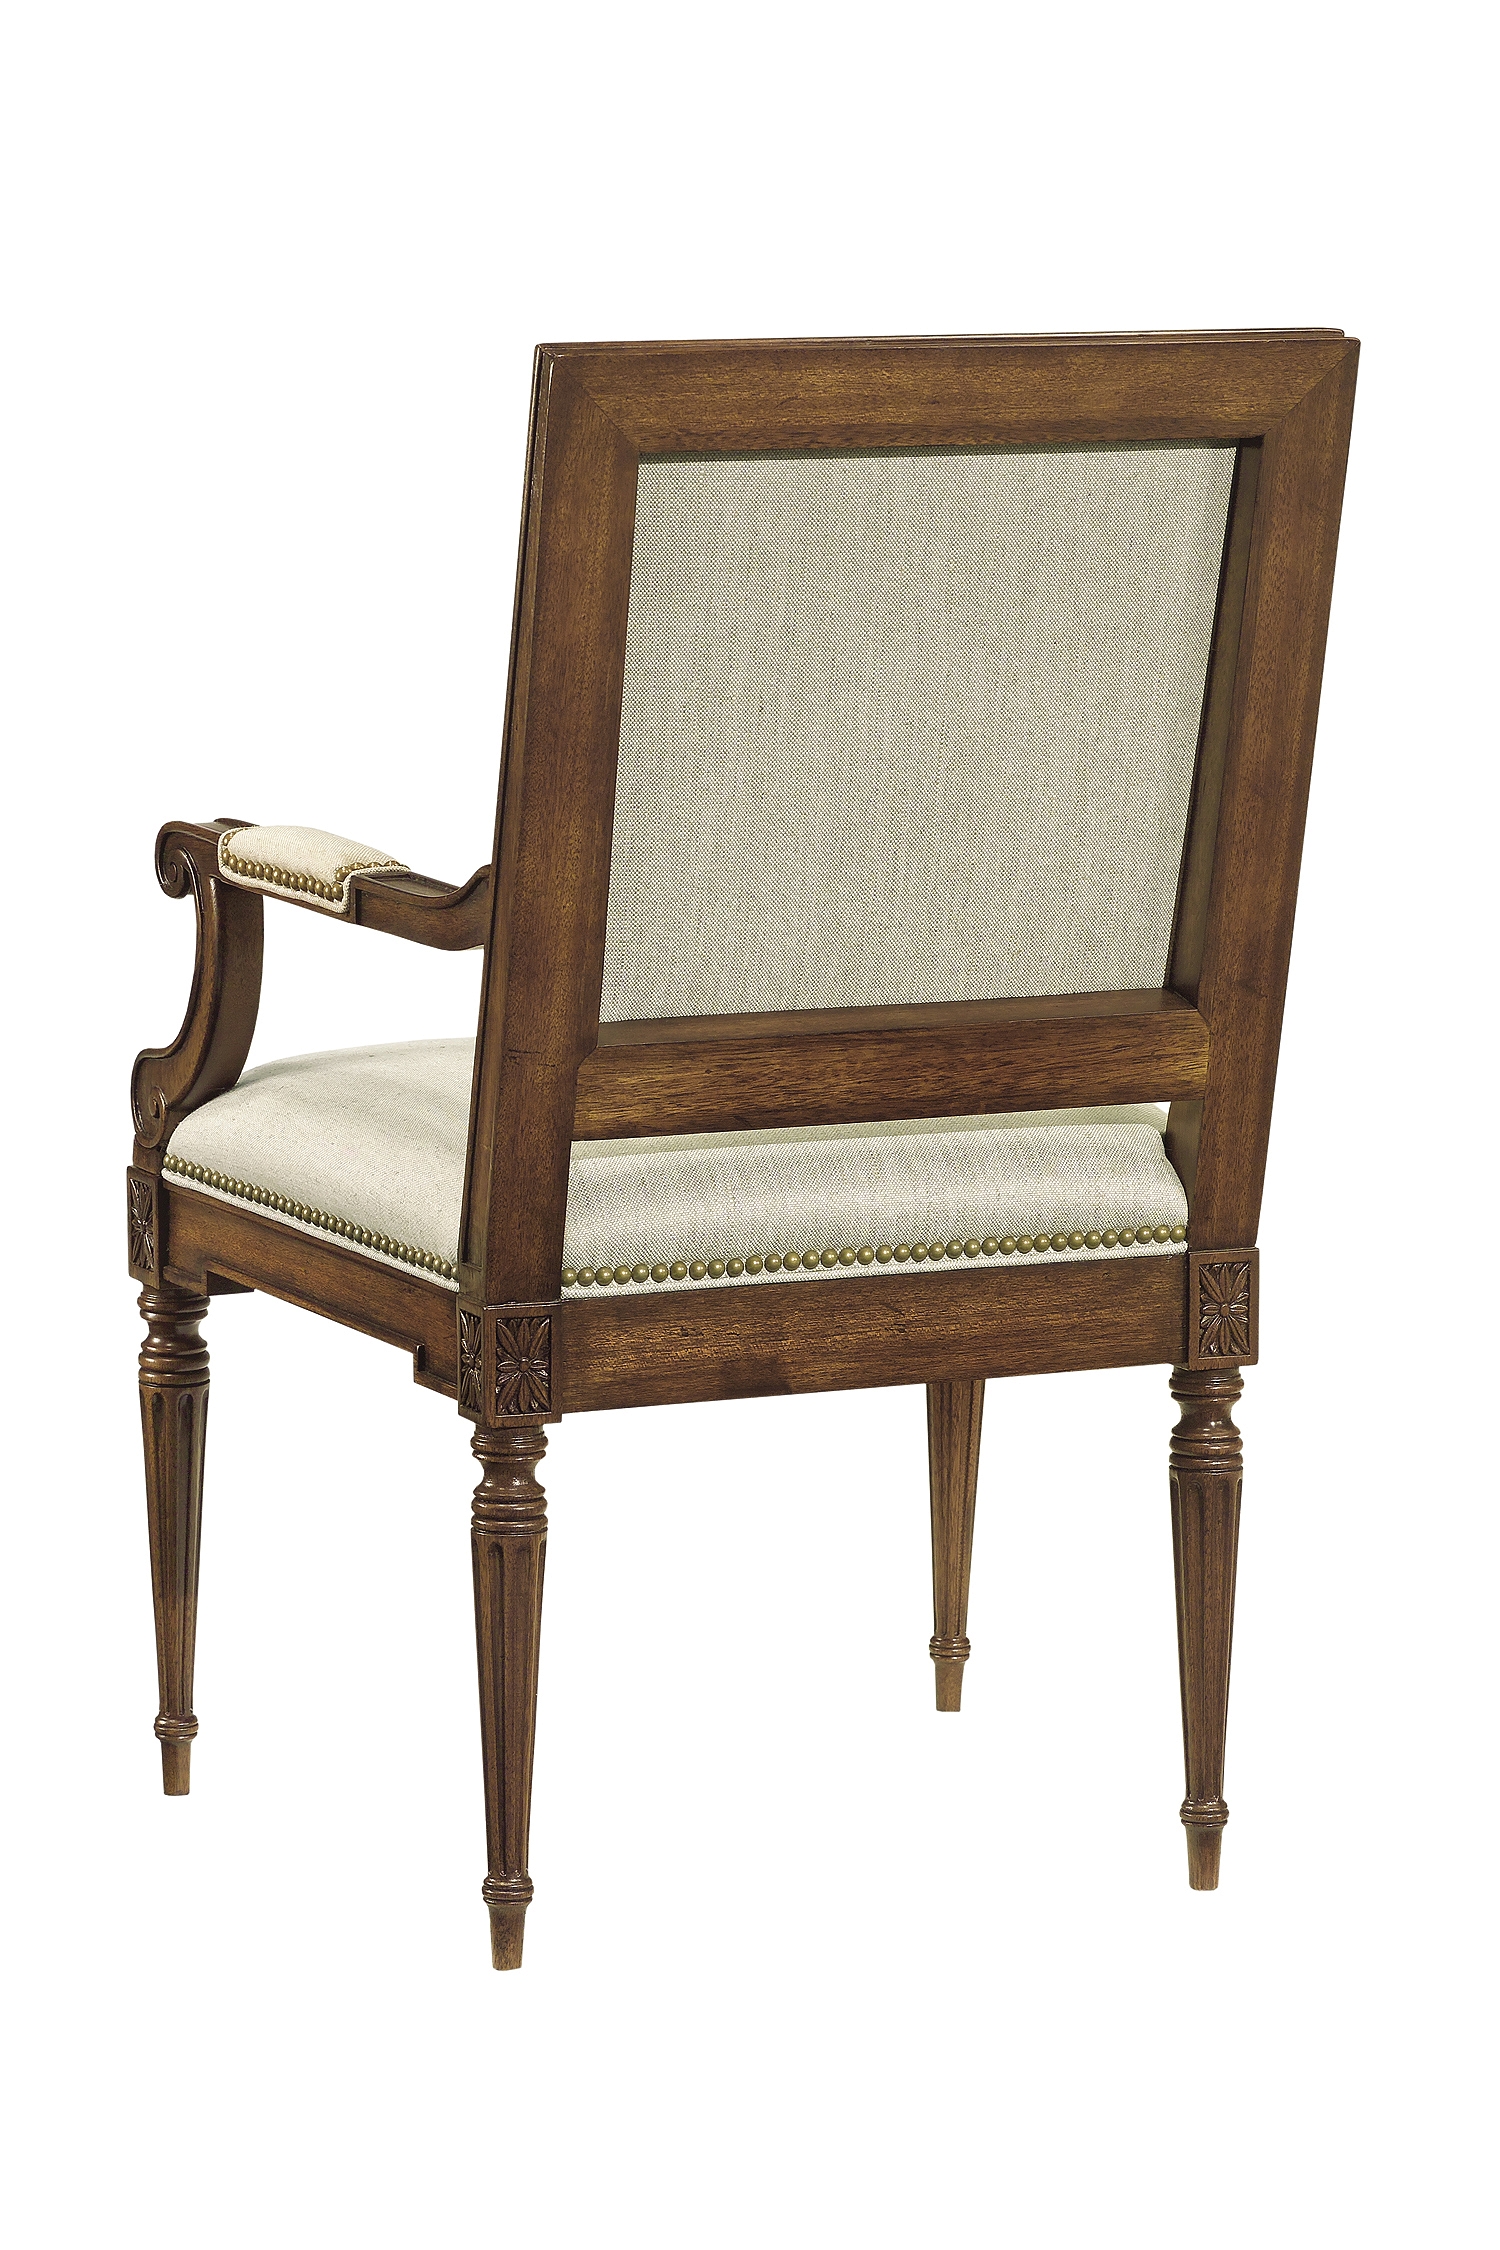 Rolesville King Louis Back Arm Chair, Assembled, Arm Height: 26.25 